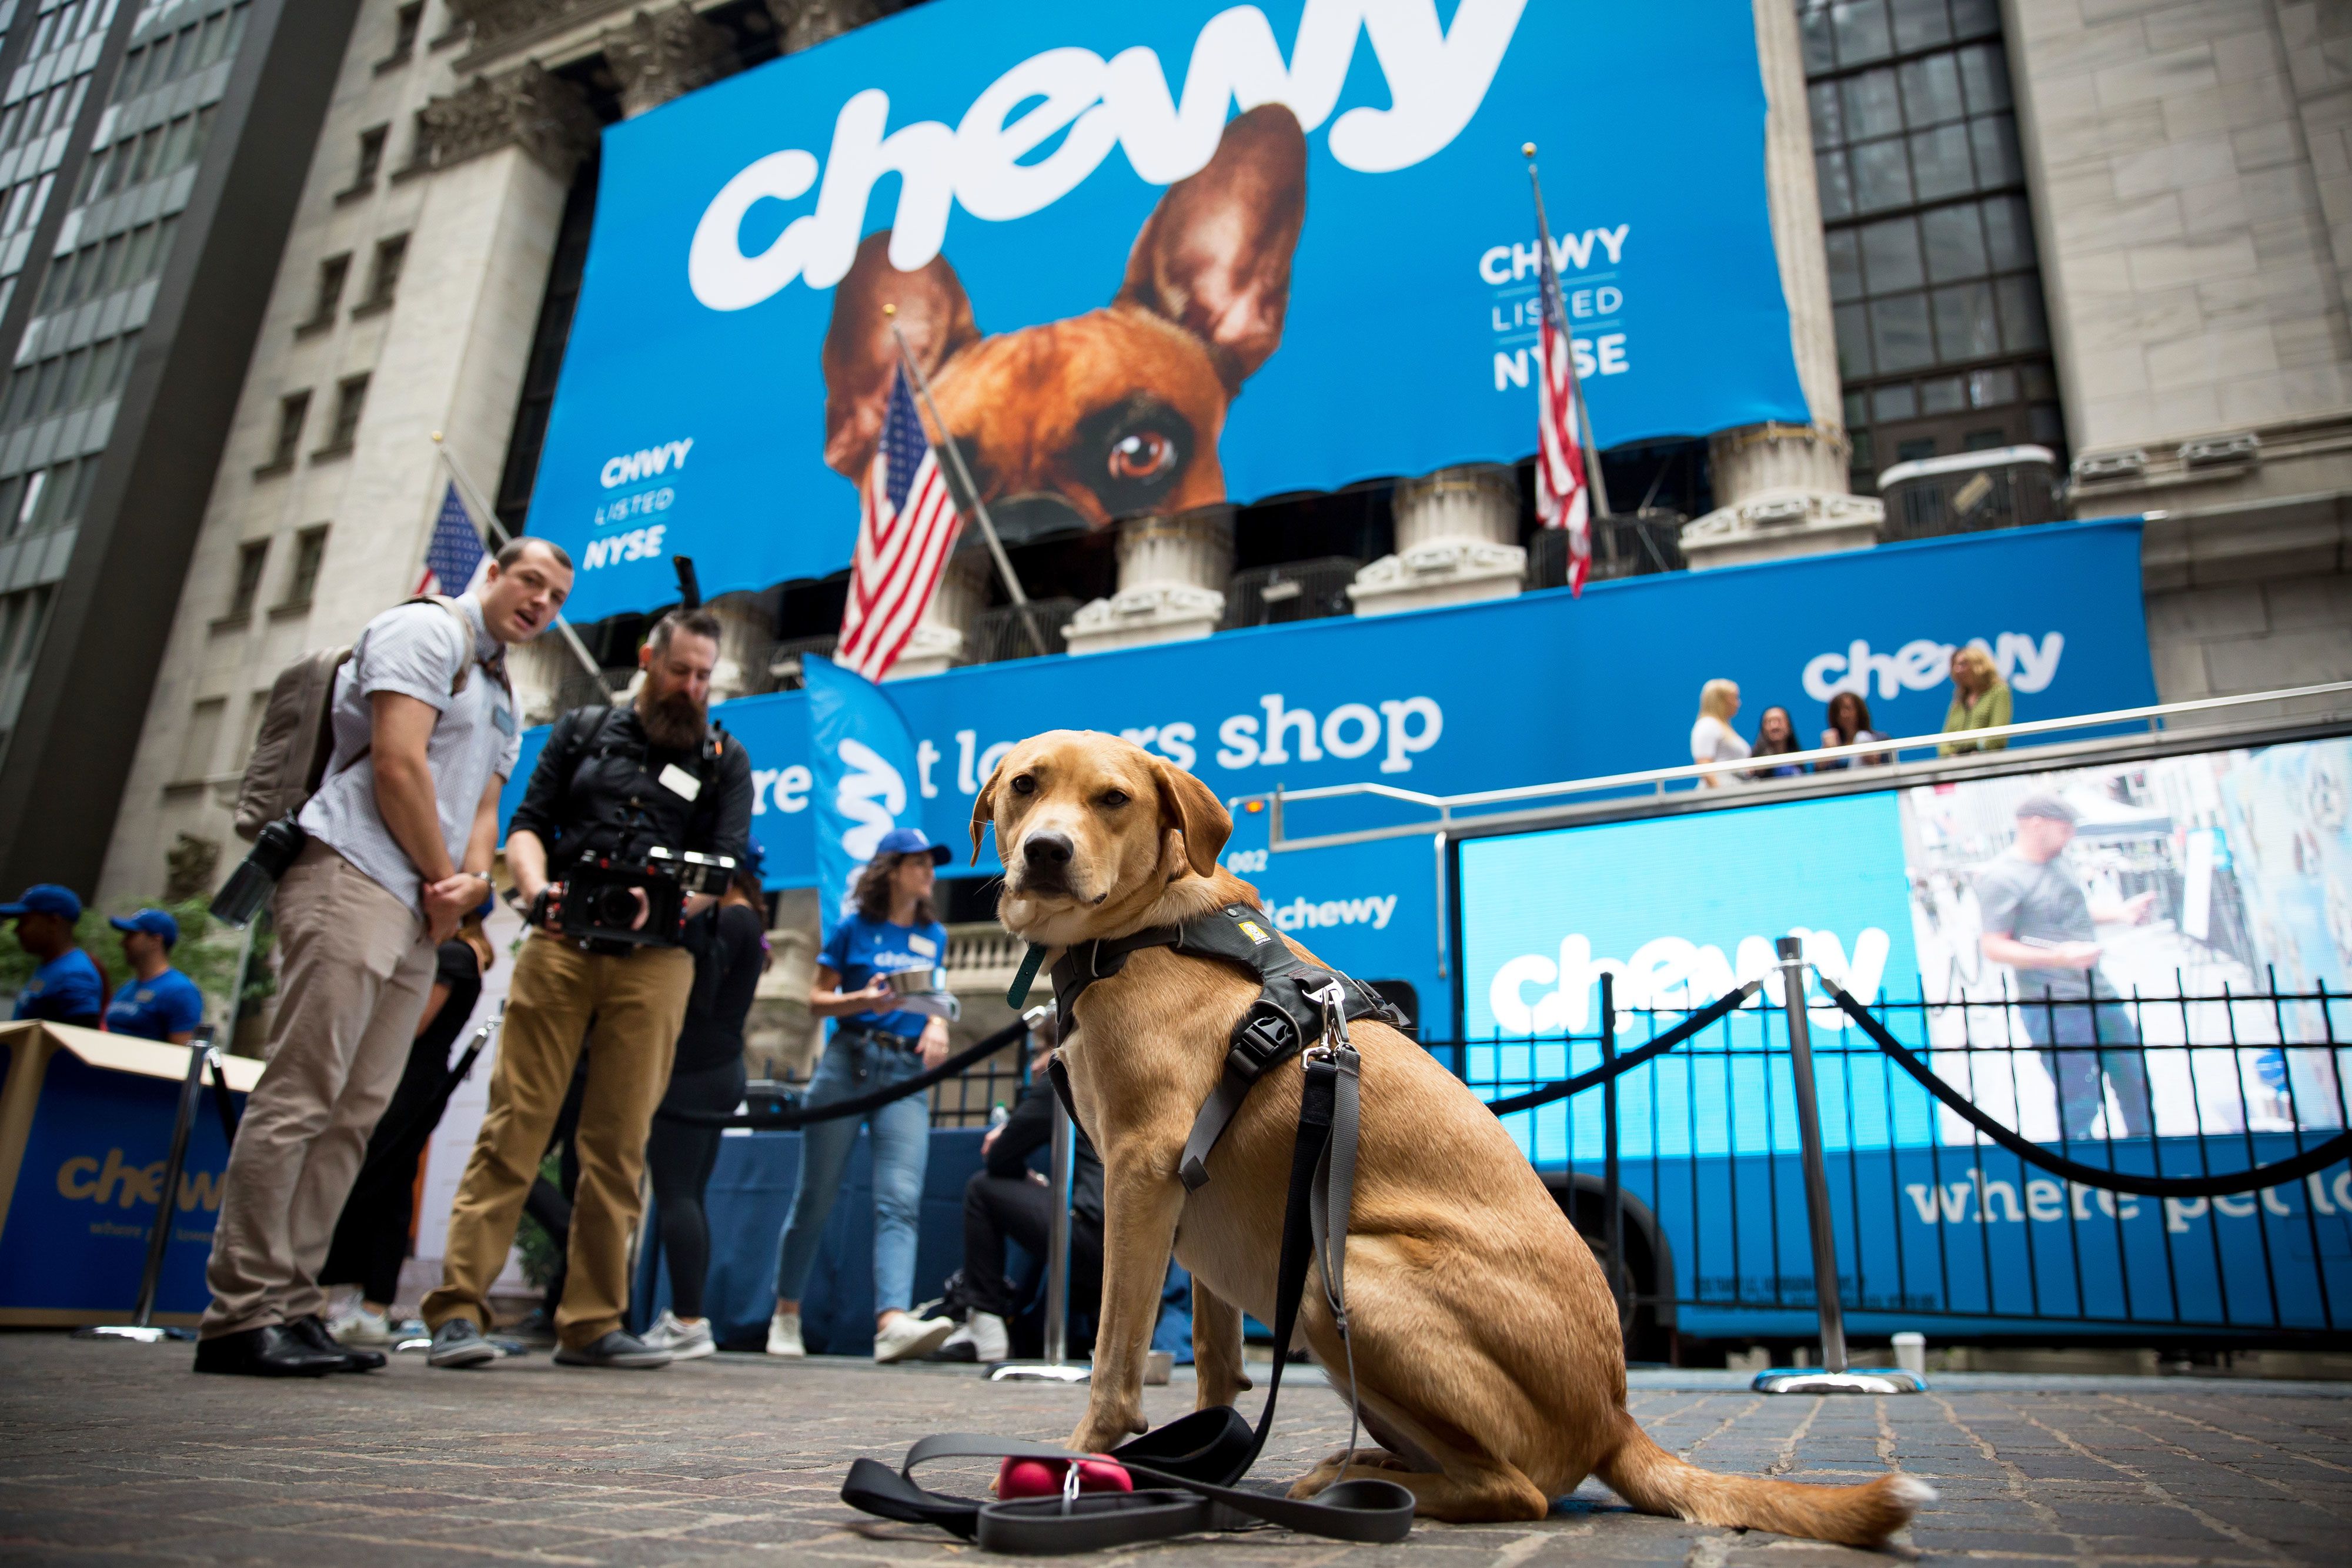 Chewy announces first earnings since IPO, matching previous guidance